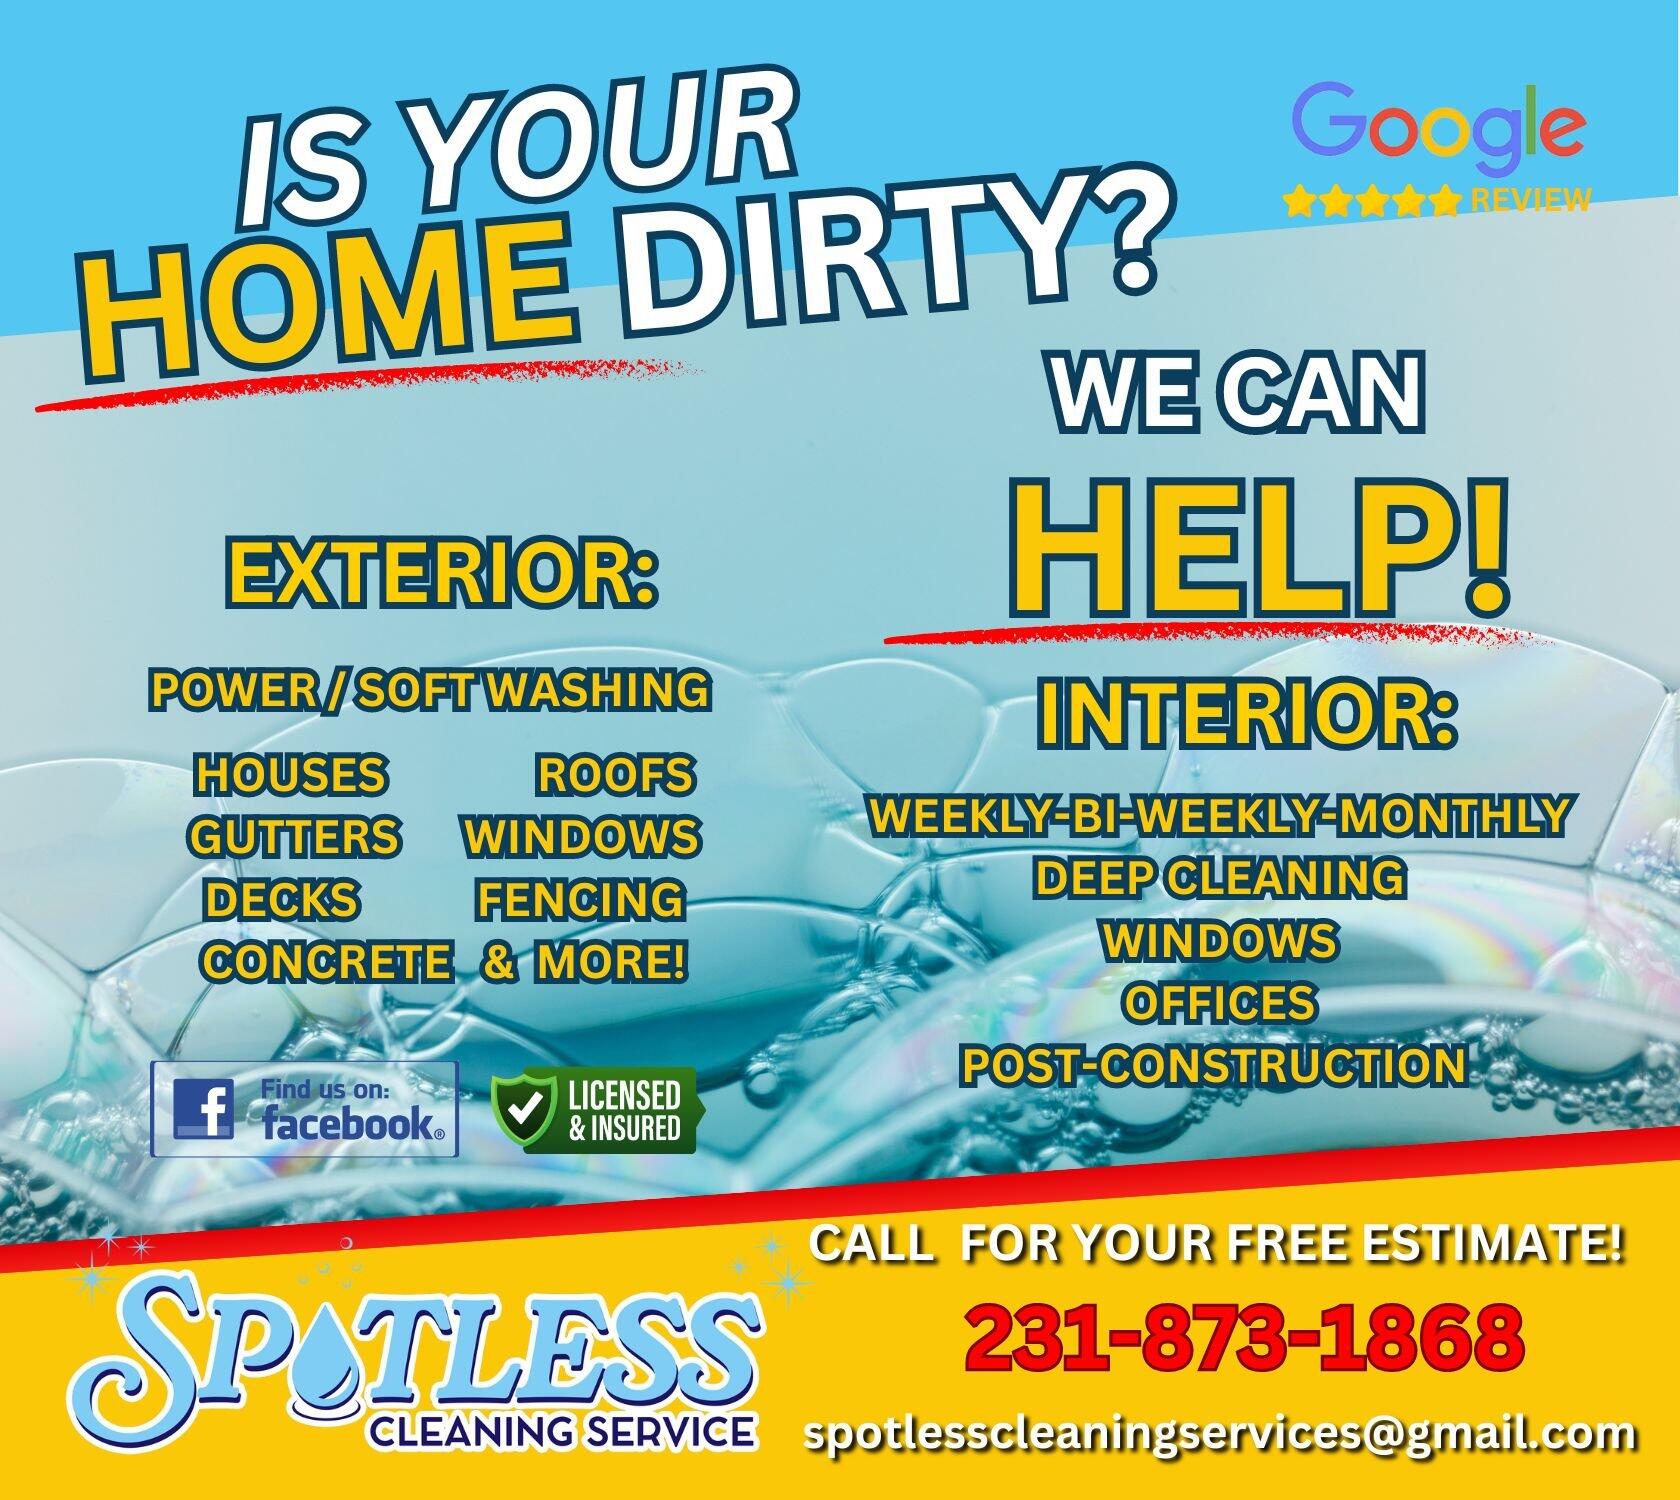 Spotless Cleaning Services 5625 N 136th Ave, Hart Michigan 49420